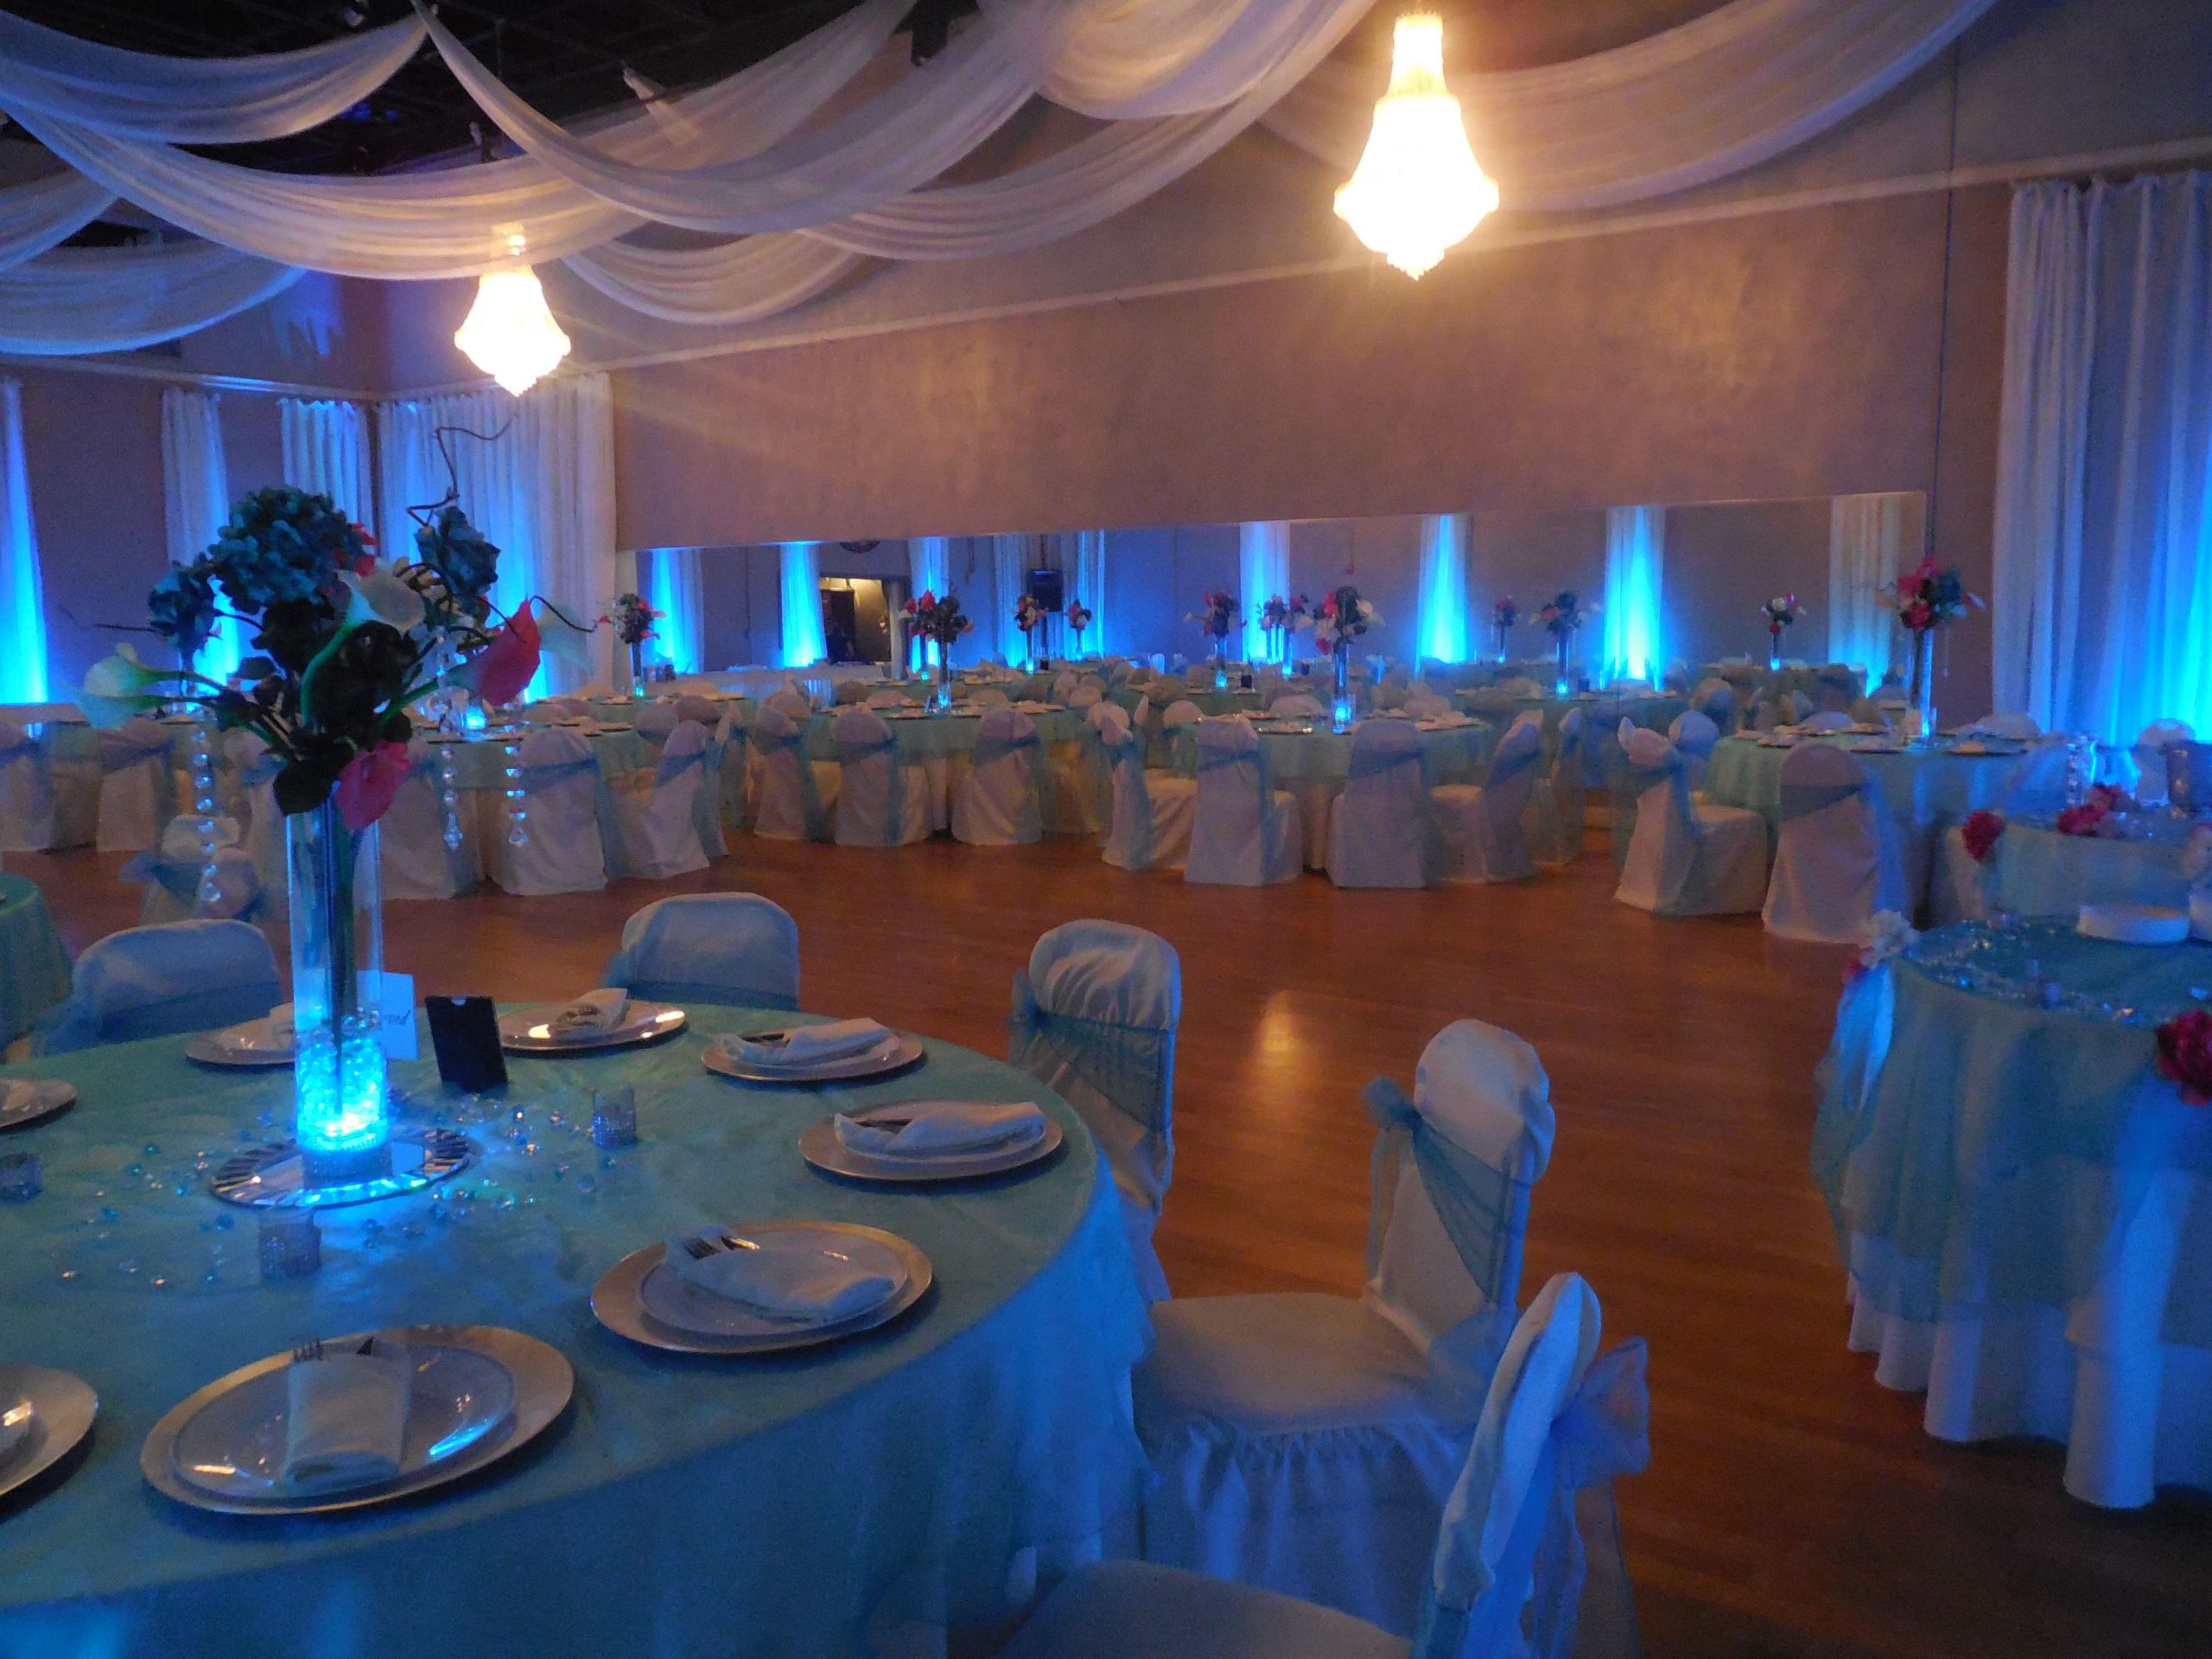 Baby Blue Wedding Decor
 Baby Blue color for wedding at The Crystal Ballroom